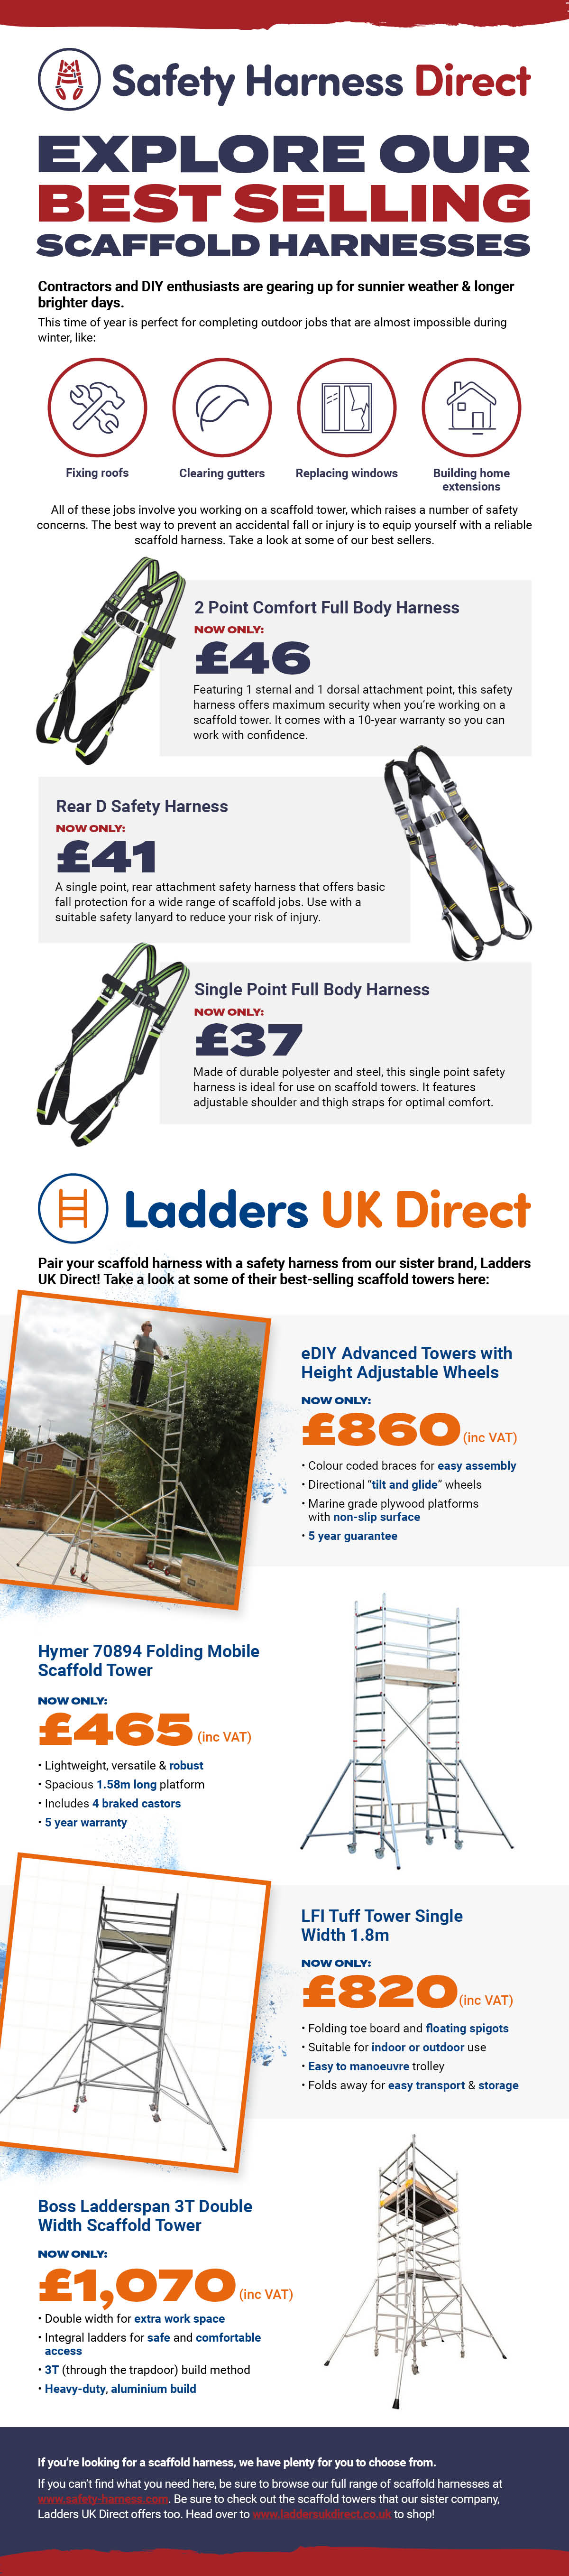 best selling scaffold harnesses